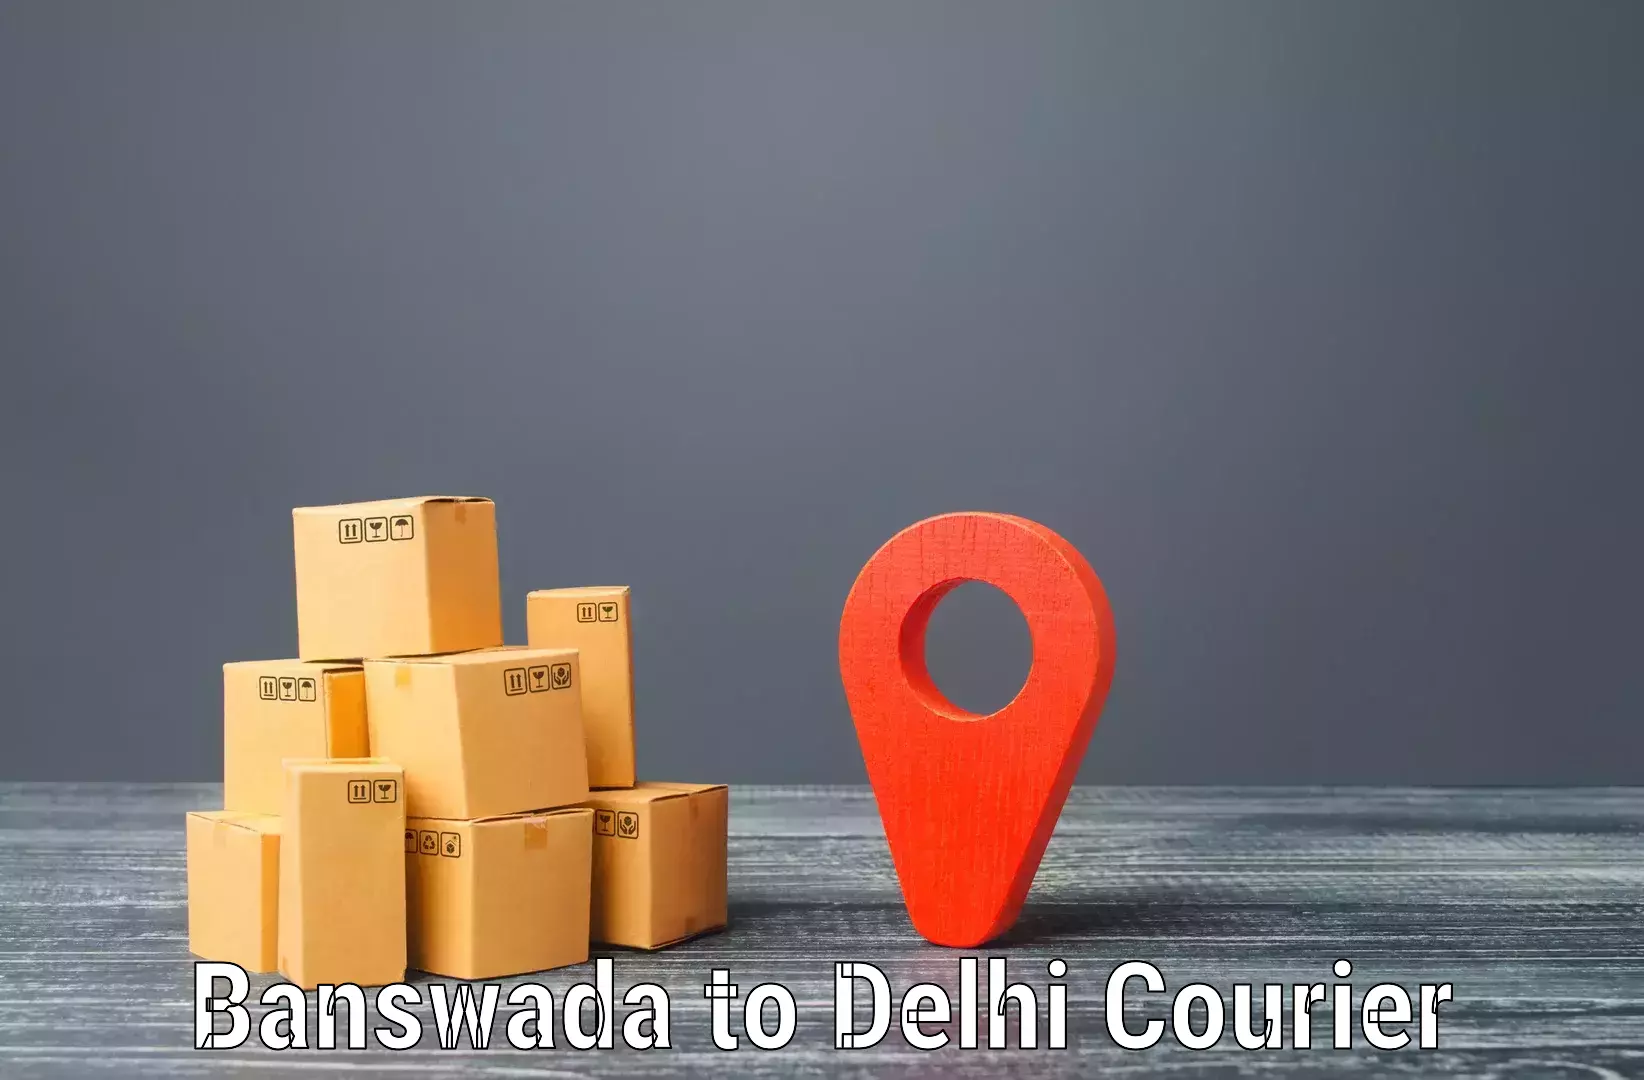 State-of-the-art courier technology Banswada to Lodhi Road